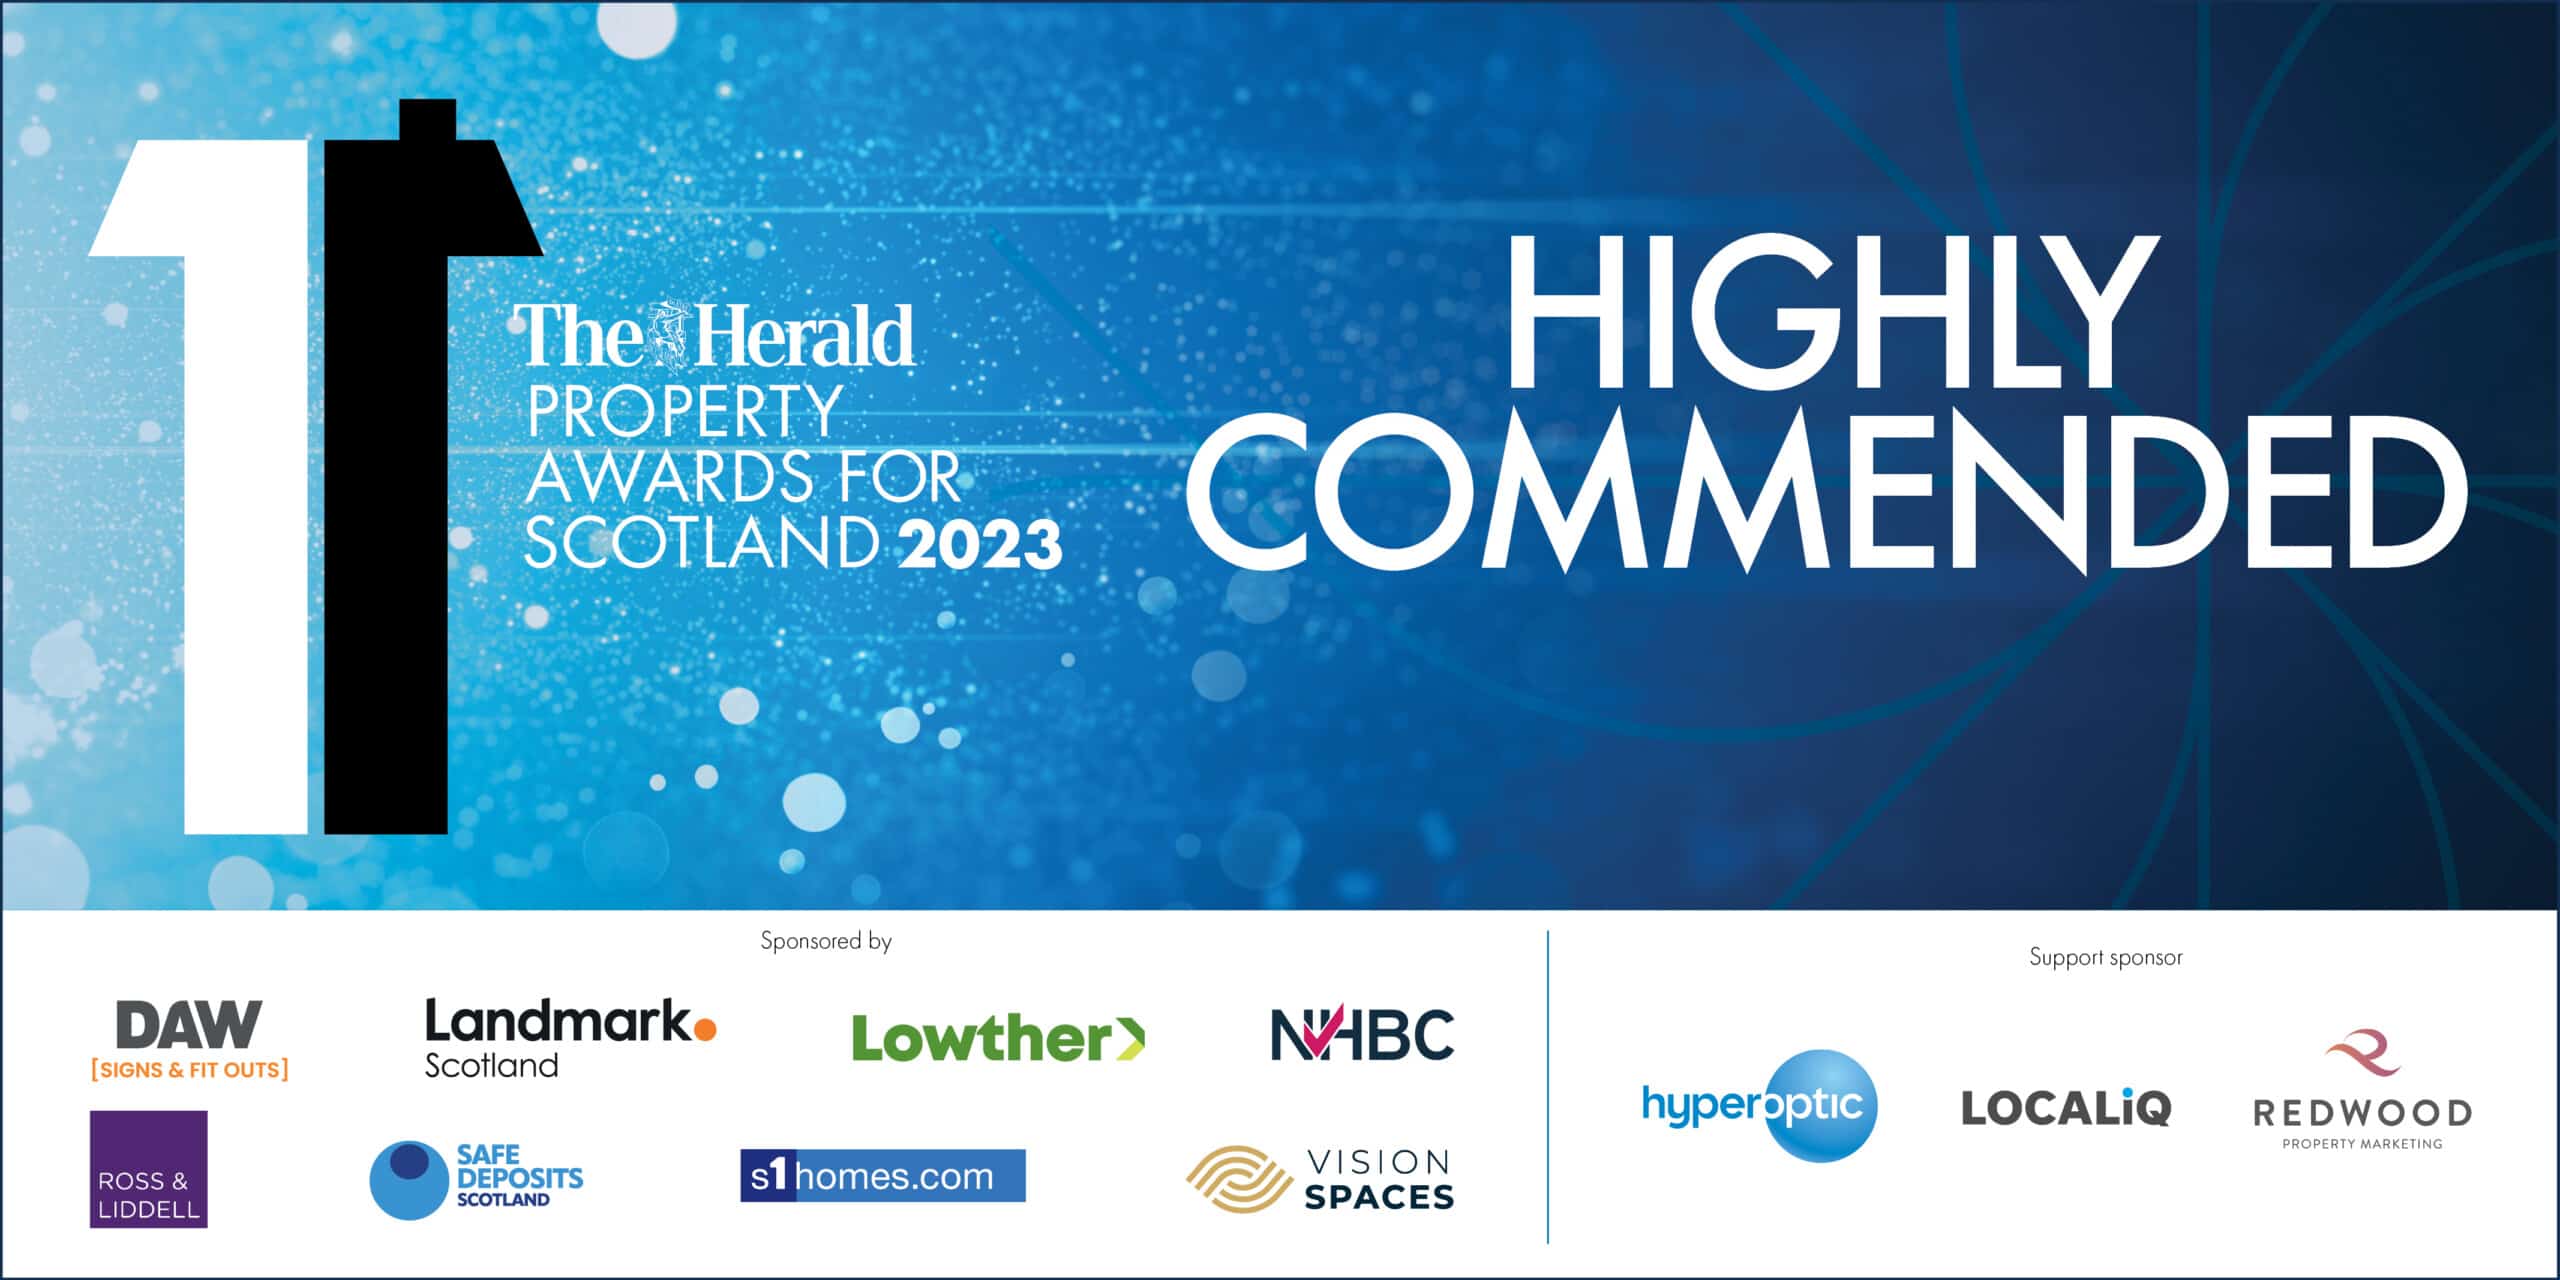 Highly Commended - The Herald property Awards for Scotland 2023